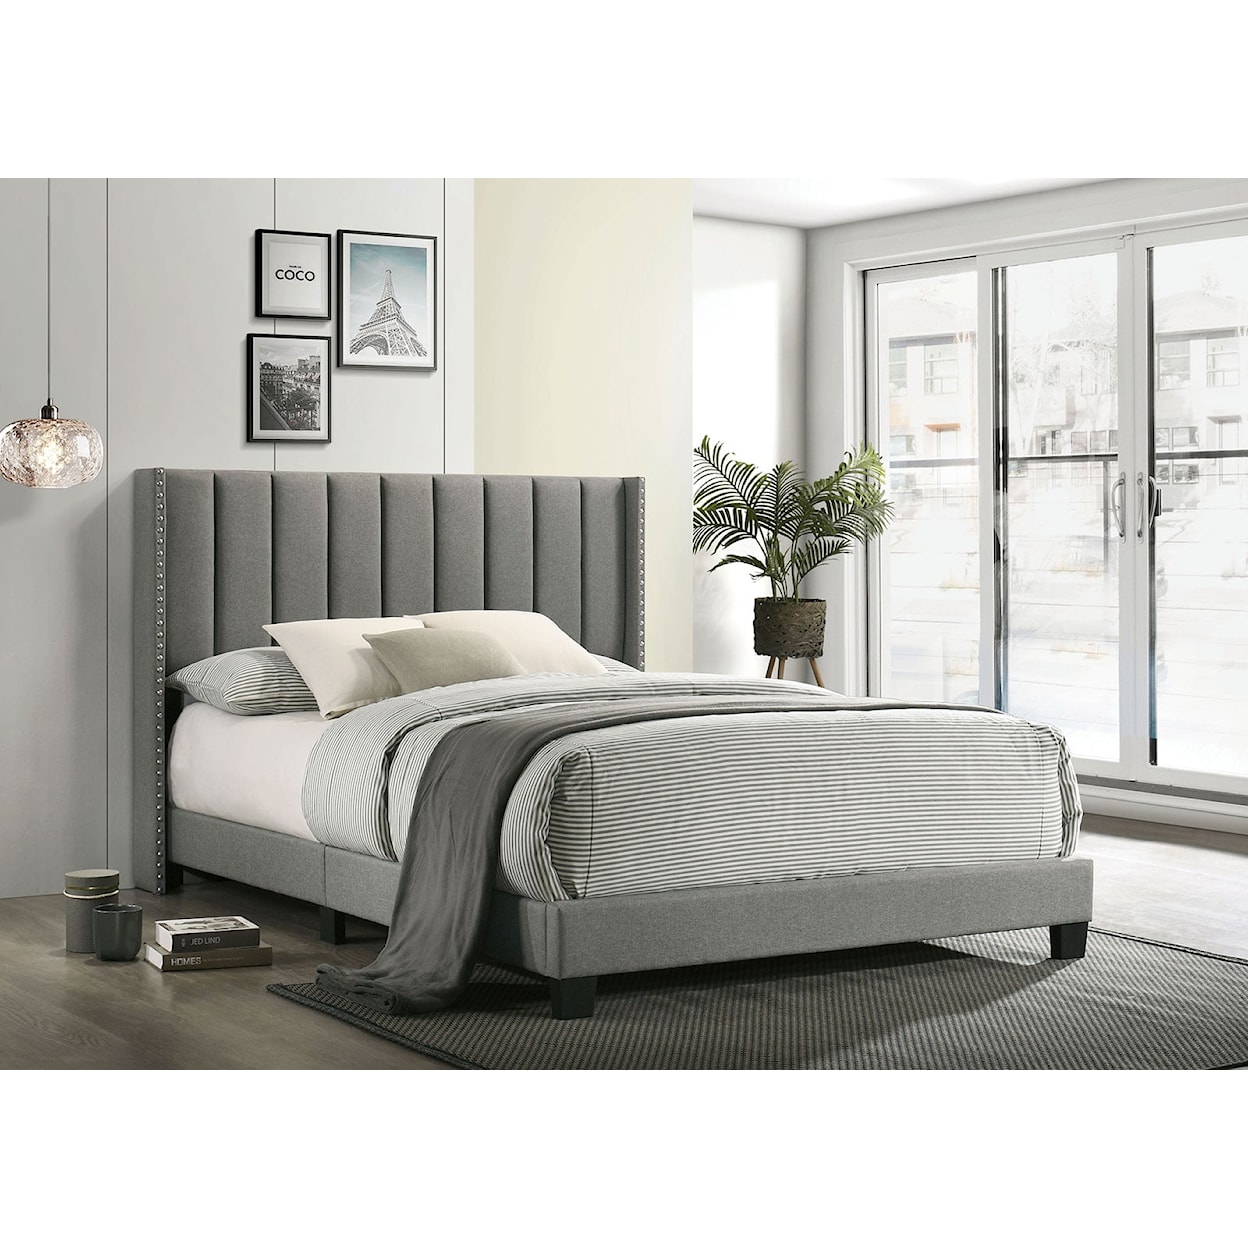 Furniture of America Kailey King Upholstered Bed